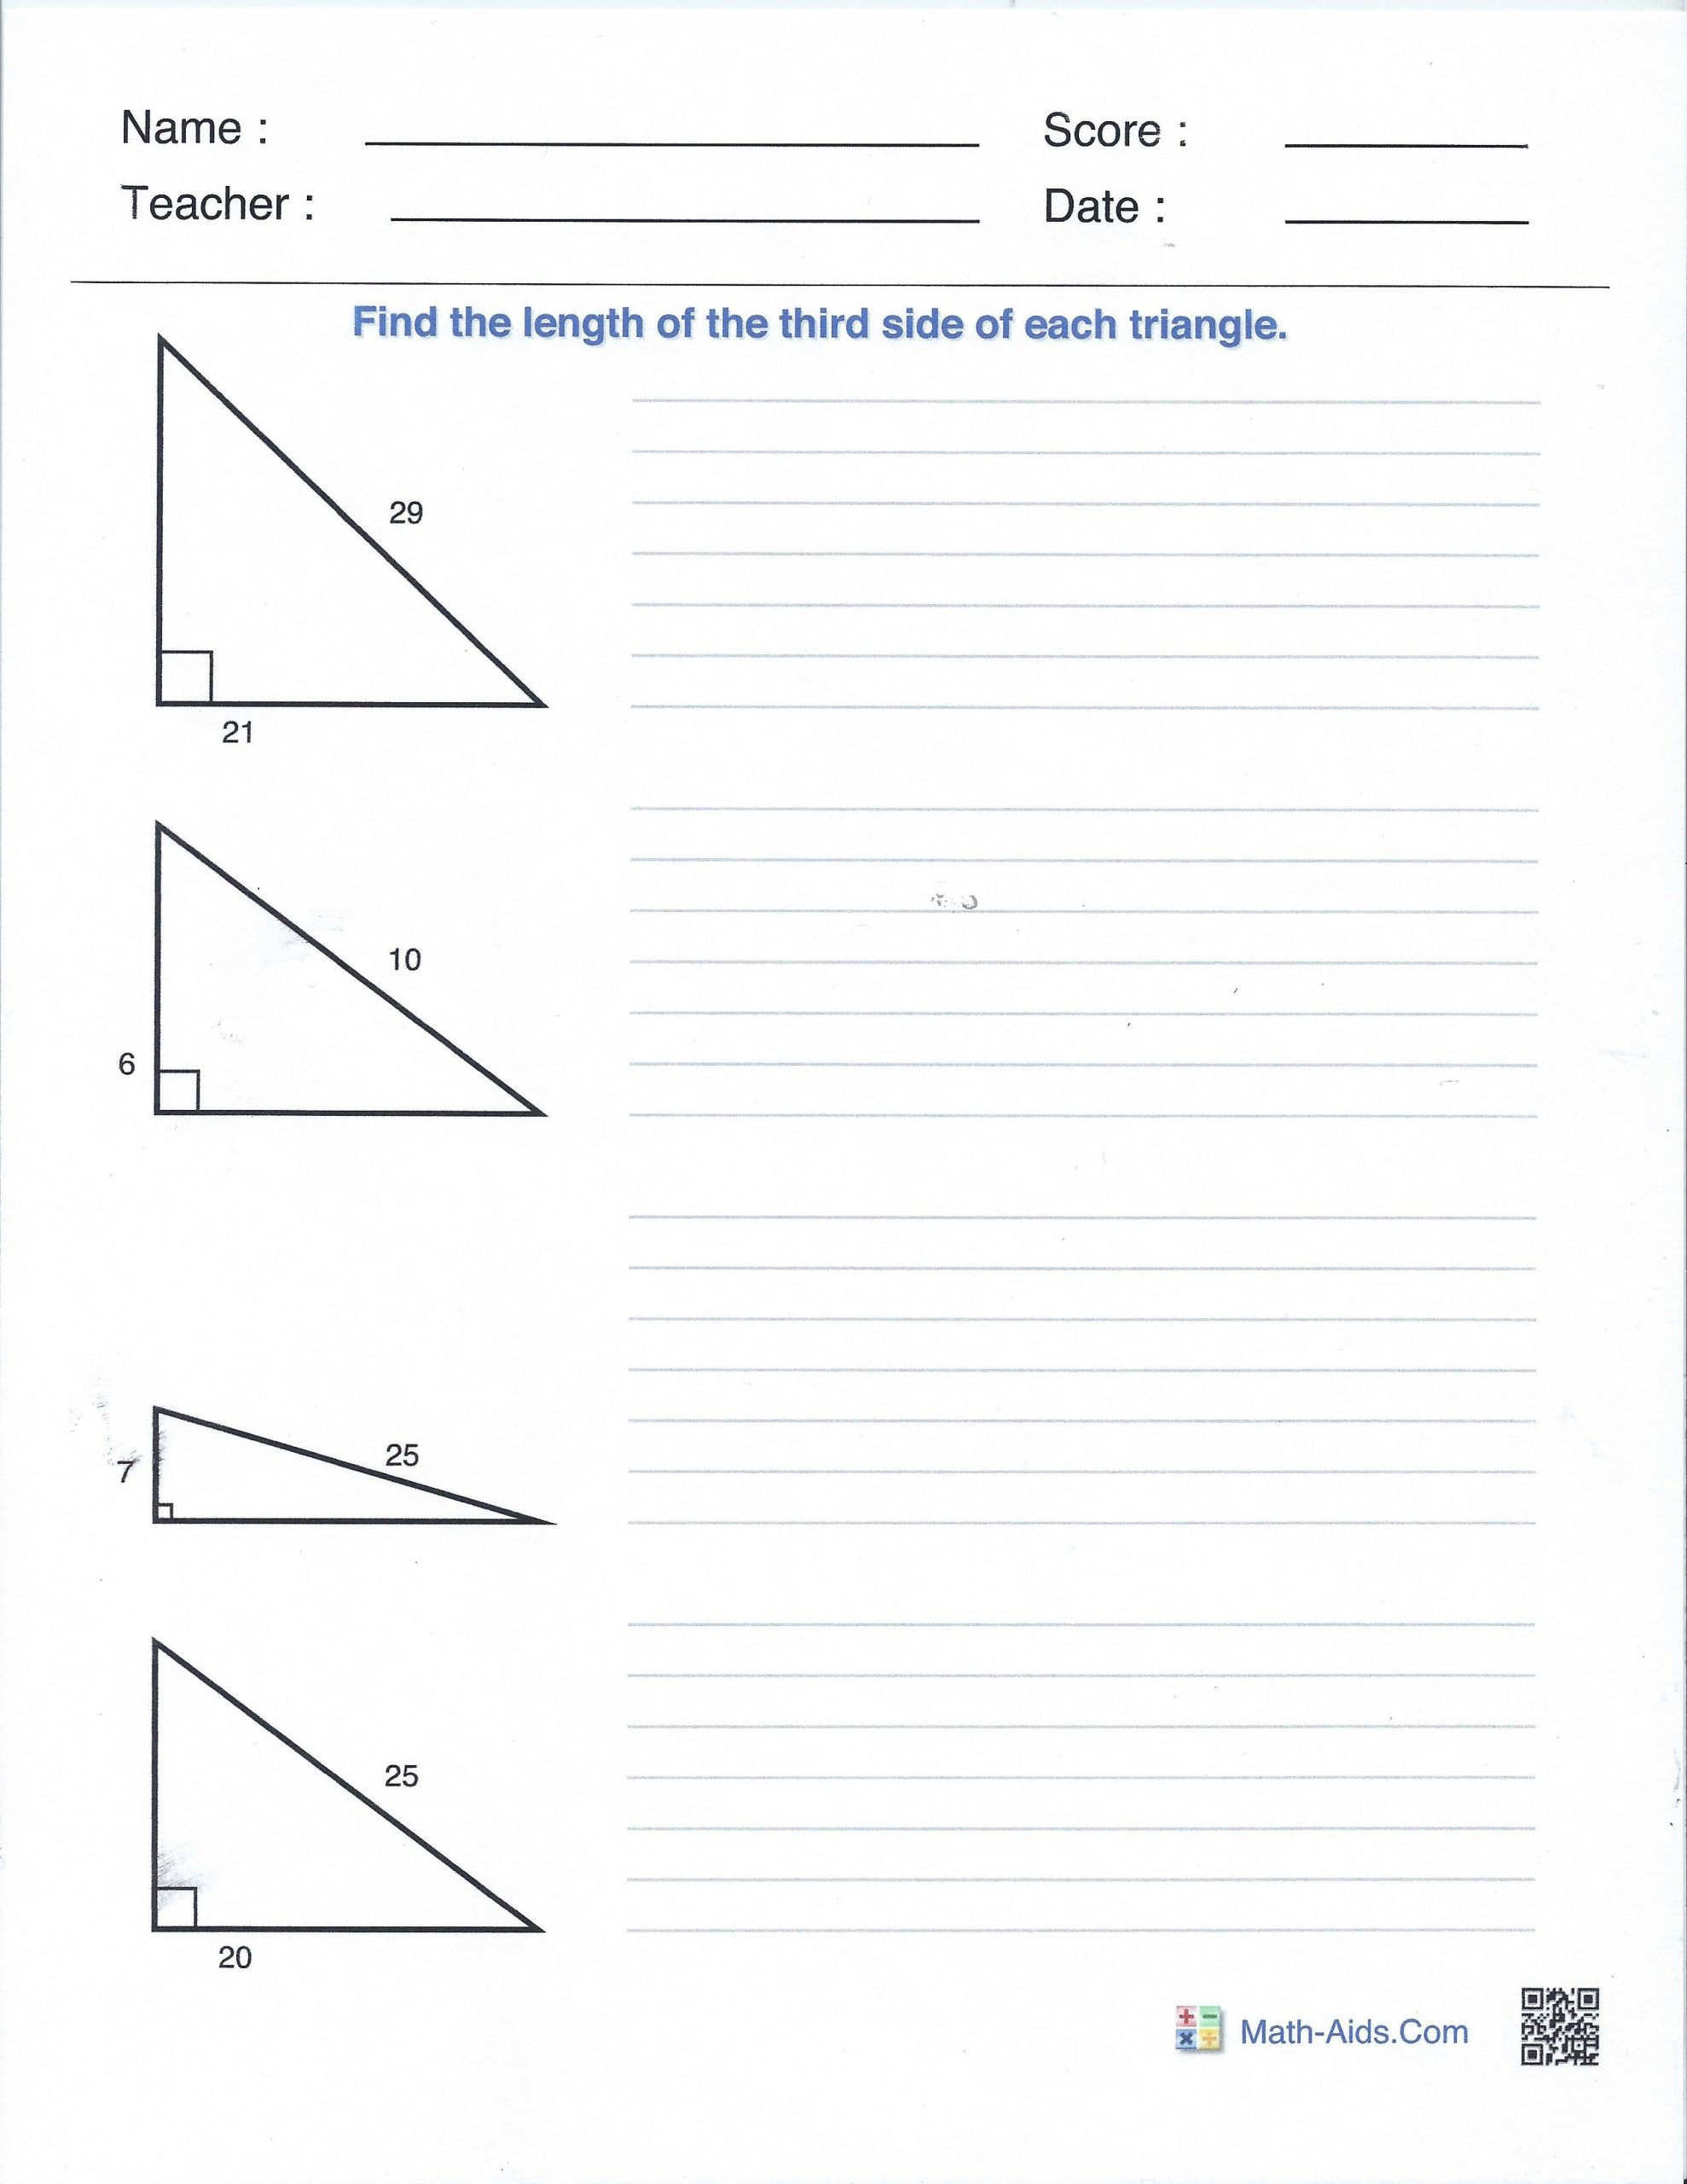 Pythagorean theorem Worksheet Answers Right Angles and the Pythagorean theorem